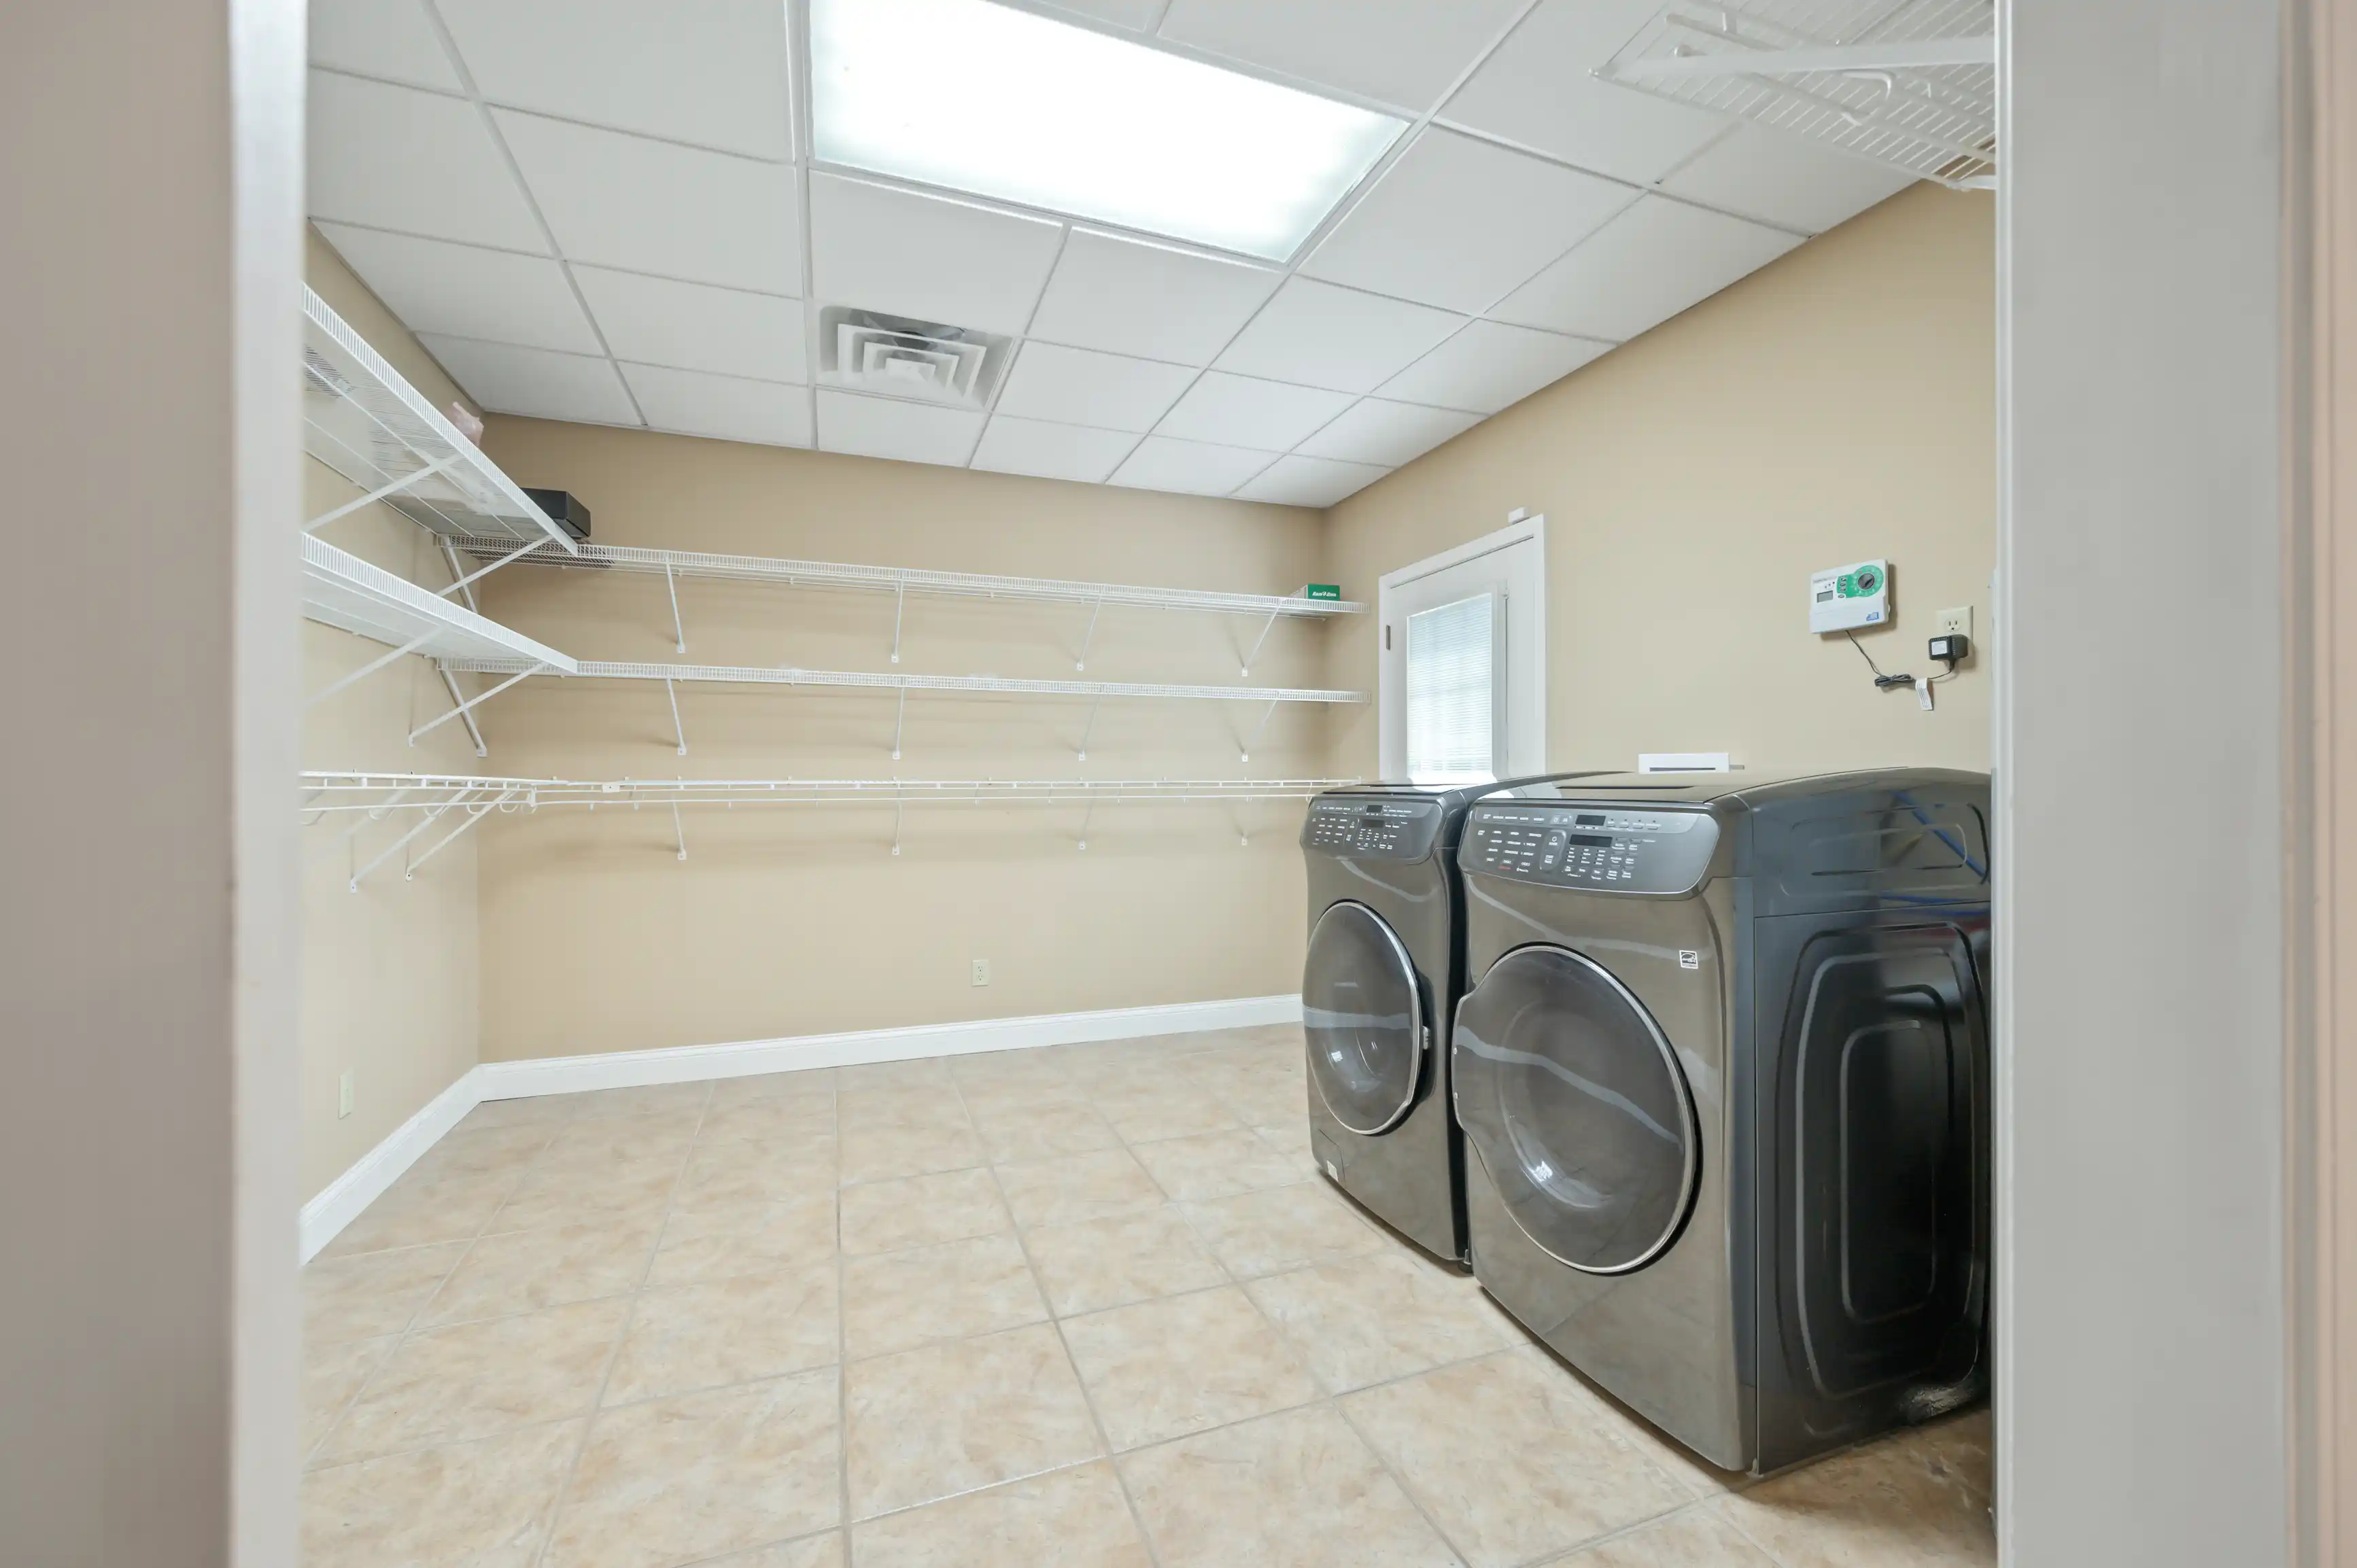 A spacious laundry room with beige walls, tiled flooring, a set of modern washing machine and dryer, and multiple white wire shelves.